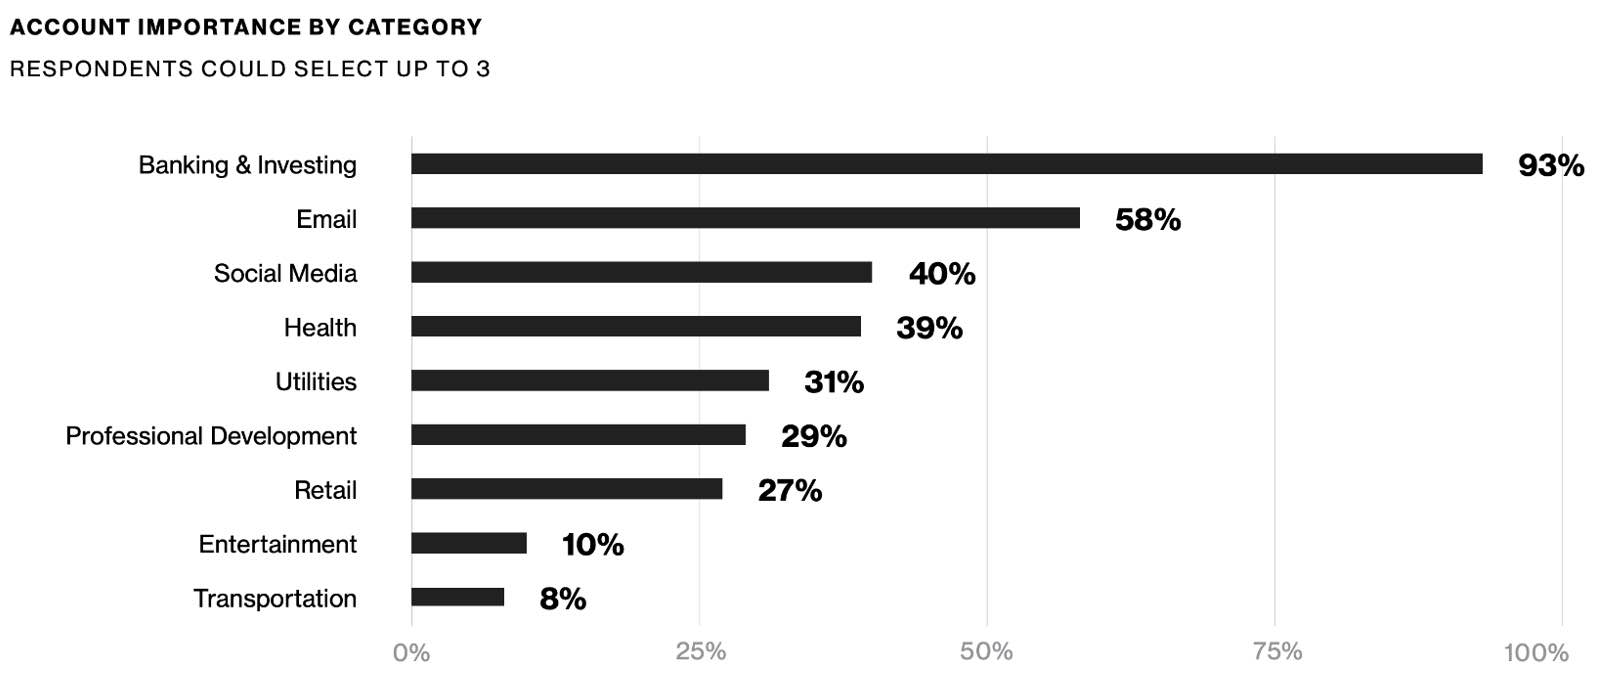 Graph showing respondent's estimation of the most important accounts by category (with respondents being able to choose up to 3). 93% of respondents choose banking and investing accounts, 58% of respondents chose email accounts, 40% of respondents chose social media accounts, 39% of respondents chose health accounts, 31% of respondents chose utilities accounts, 29% of respondents chose professional development accounts, 27% of respondents chose retail accounts, 10% of respondents chose entertainment accounts, and 8% of respondents chose transportation accounts.